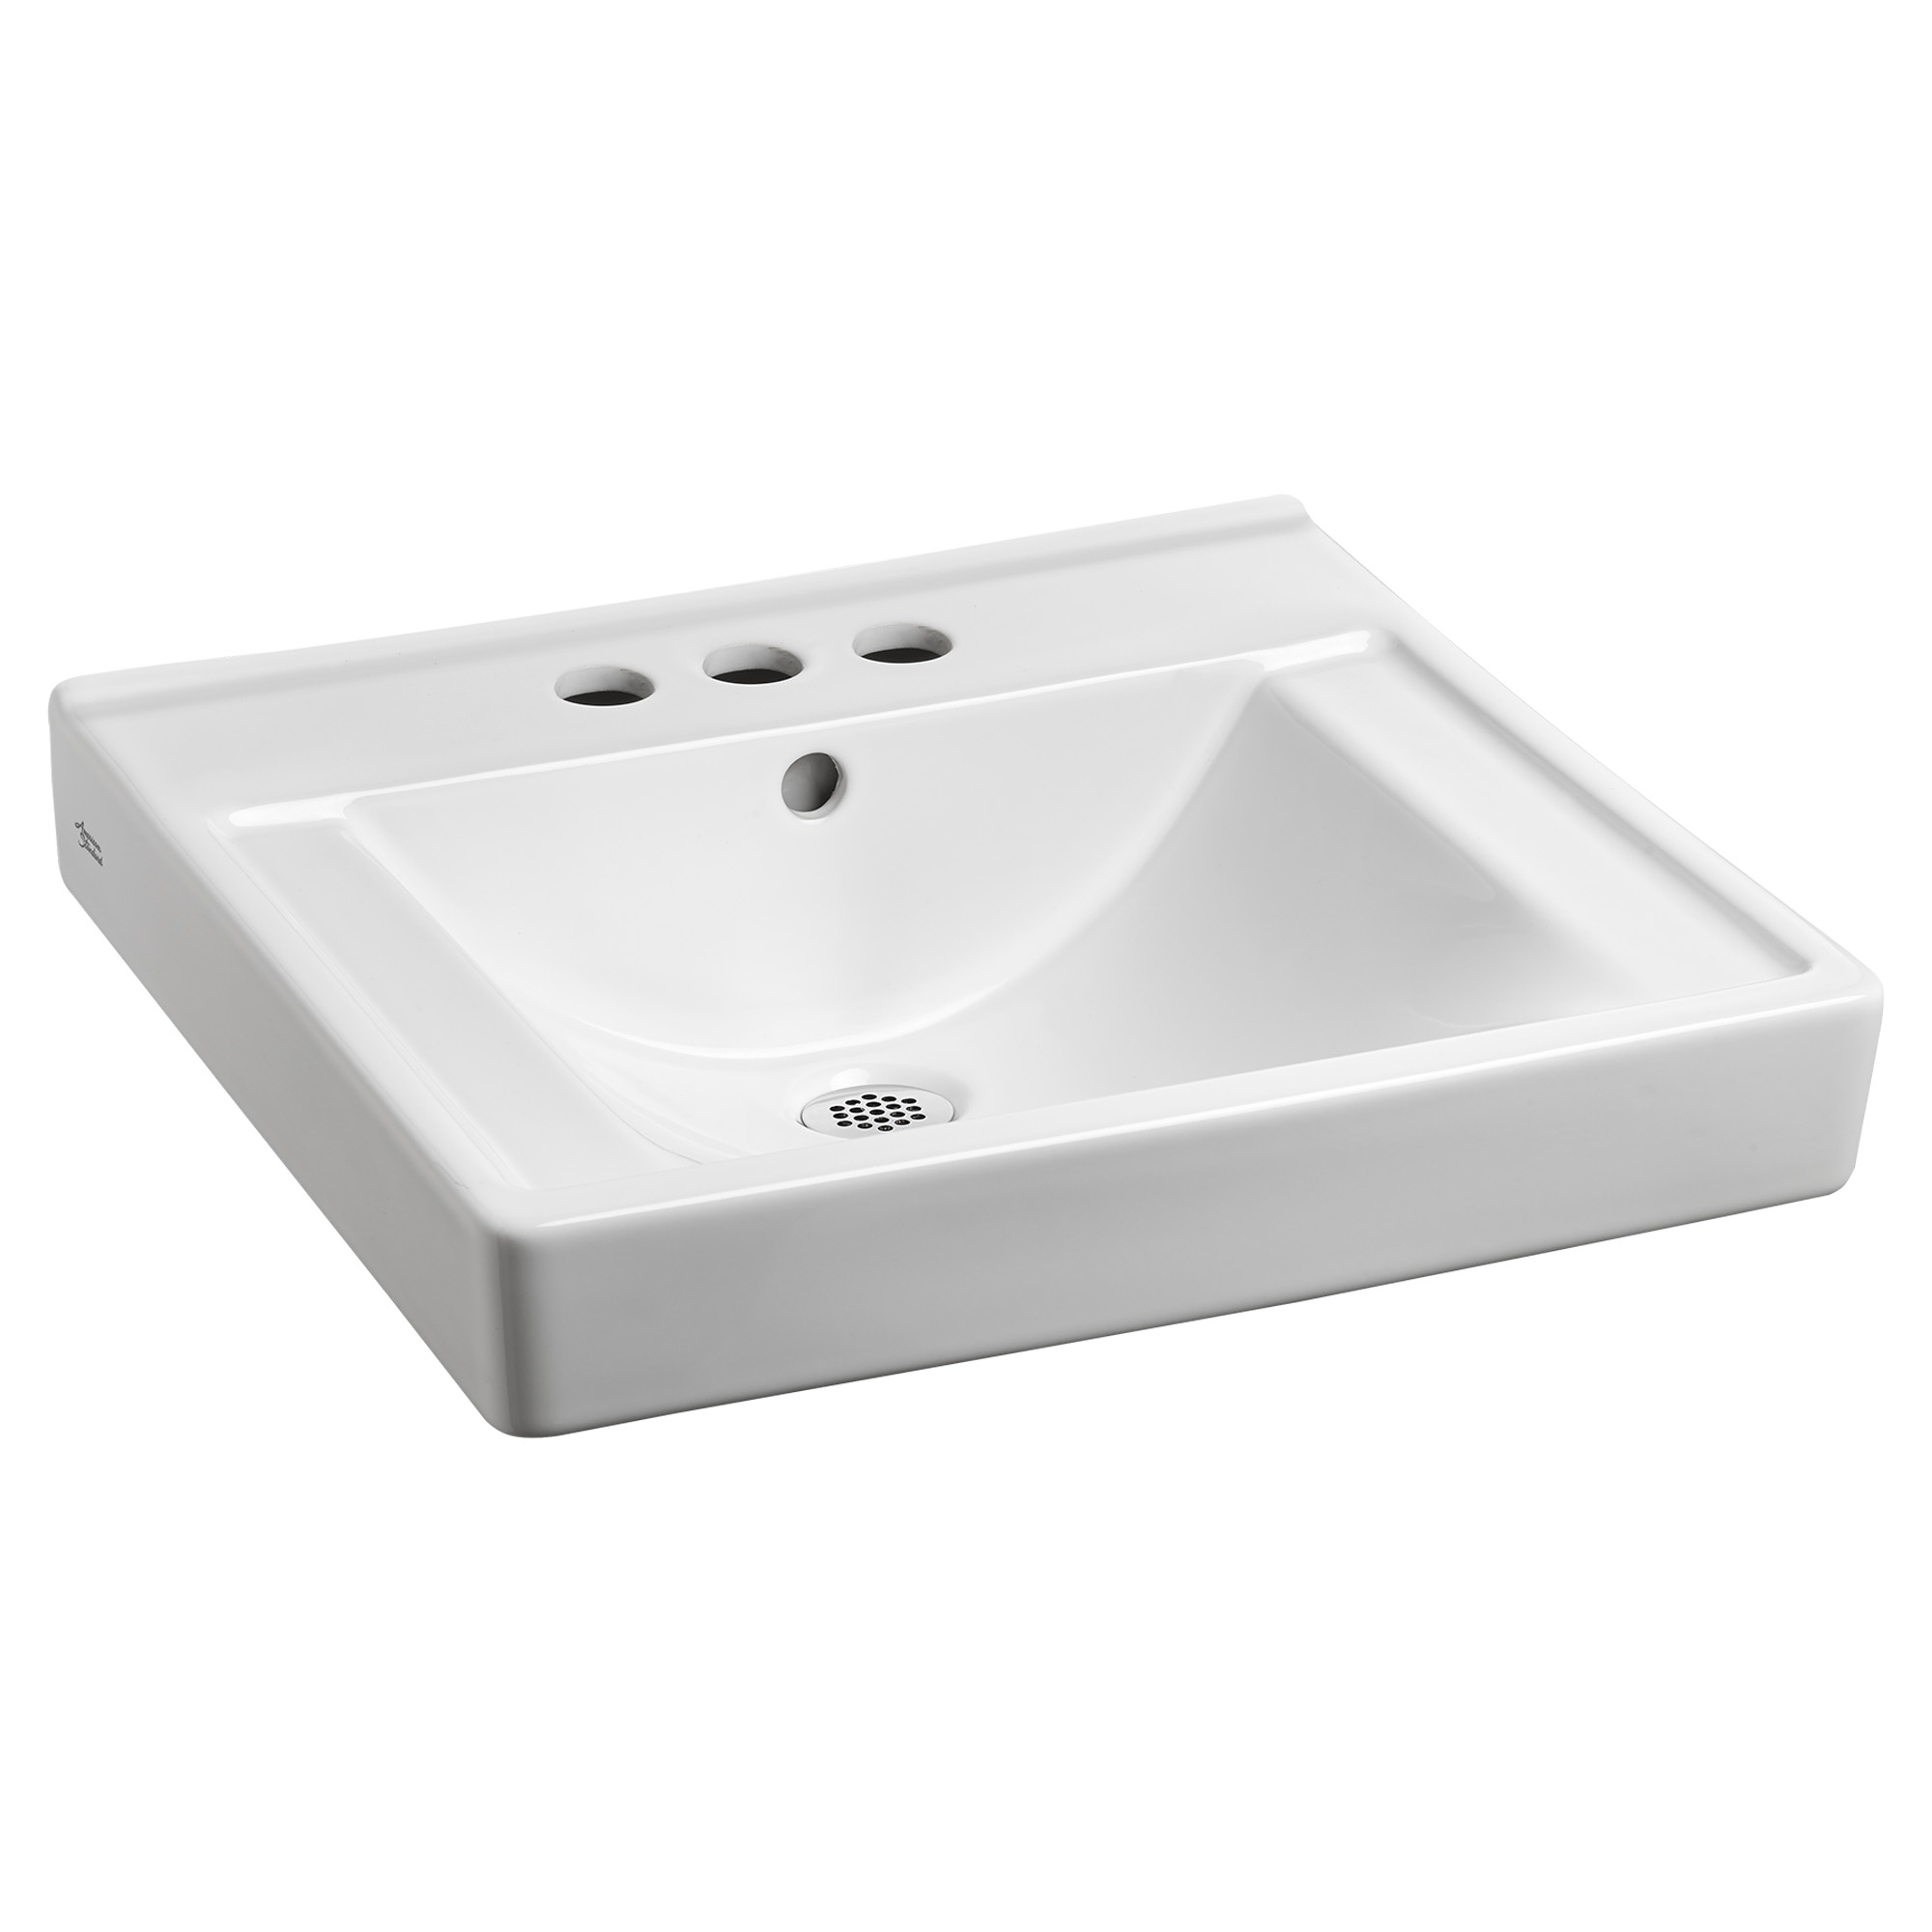 Decorum 20x18-1/4" Wall-Hung Lav Sink in White w/4" Faucet Holes